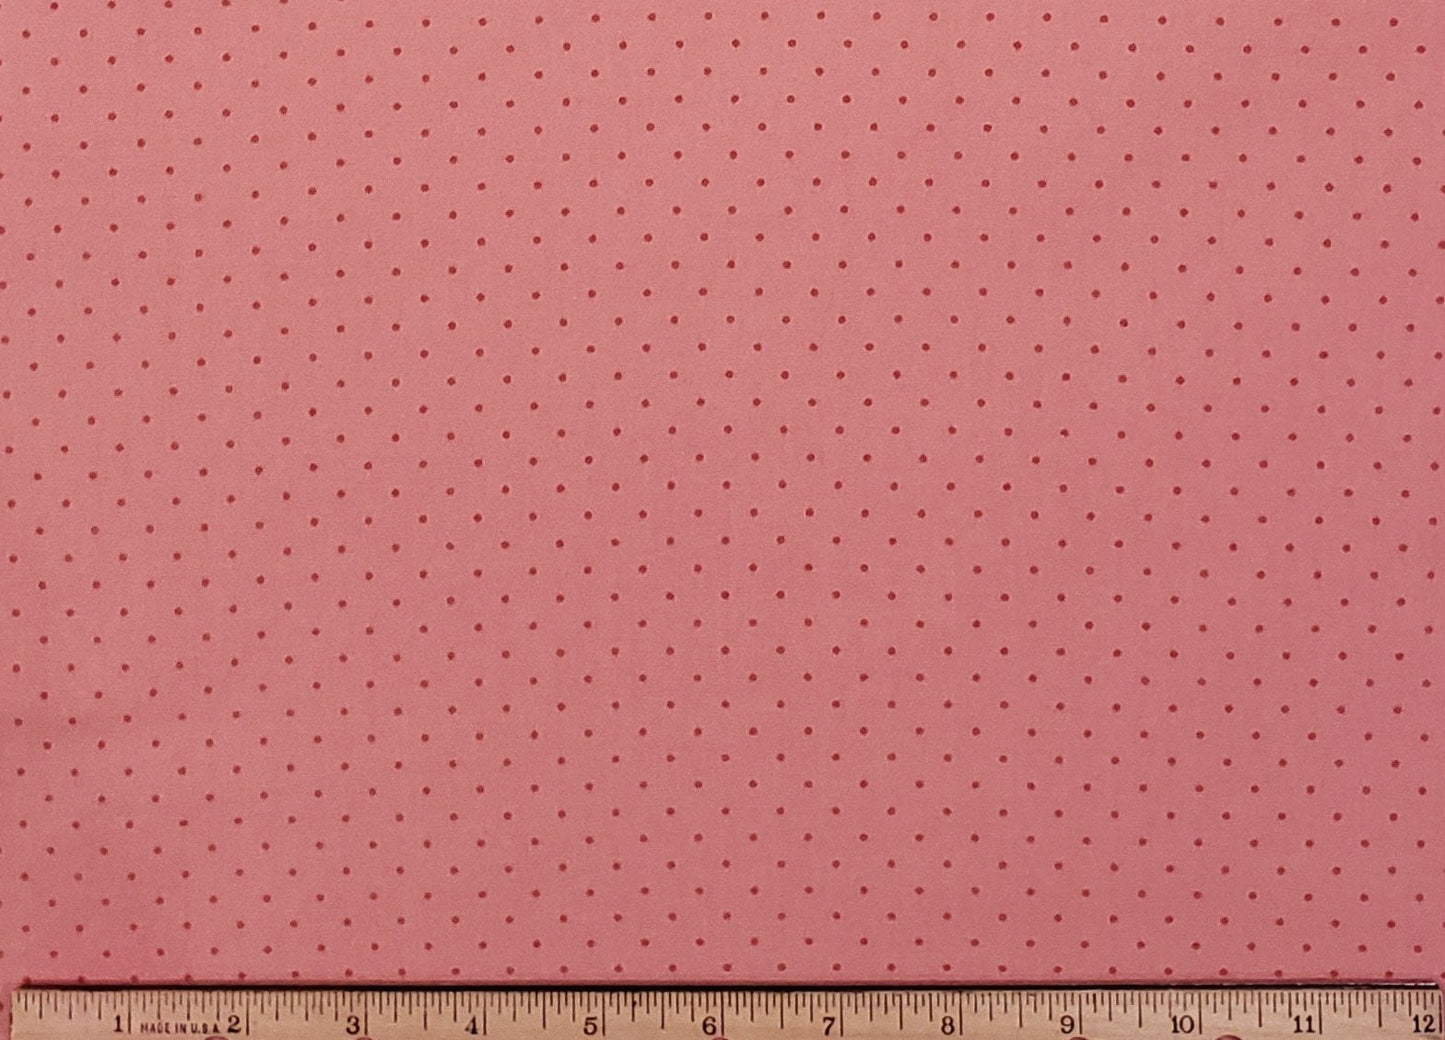 EOB - Ellery by Quilt Shop by Marcus Brothers Textiles - Coral Tone-on-Tone Fabric with Polka Dots